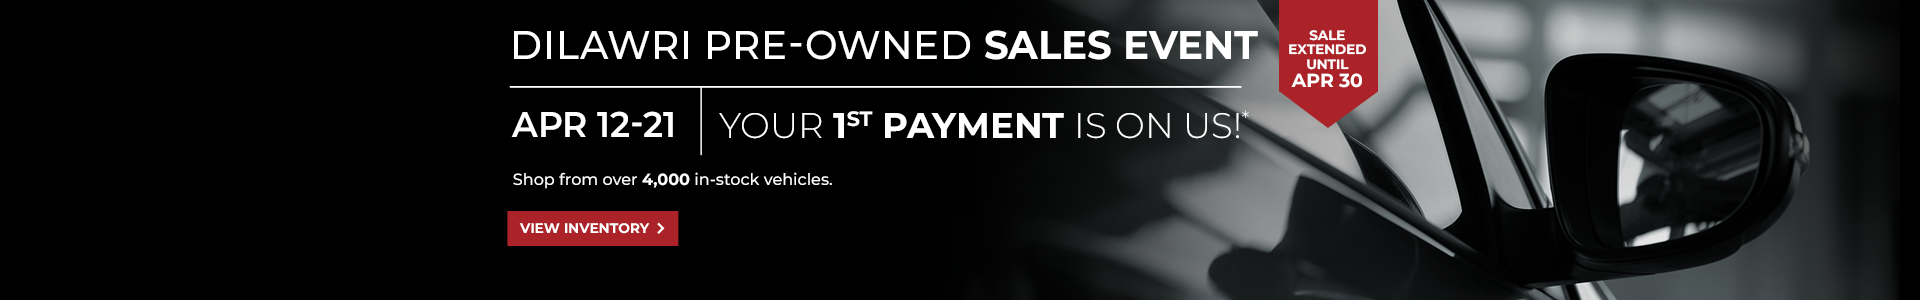 DILAWRI PRE-OWNED SALES EVENT Extended